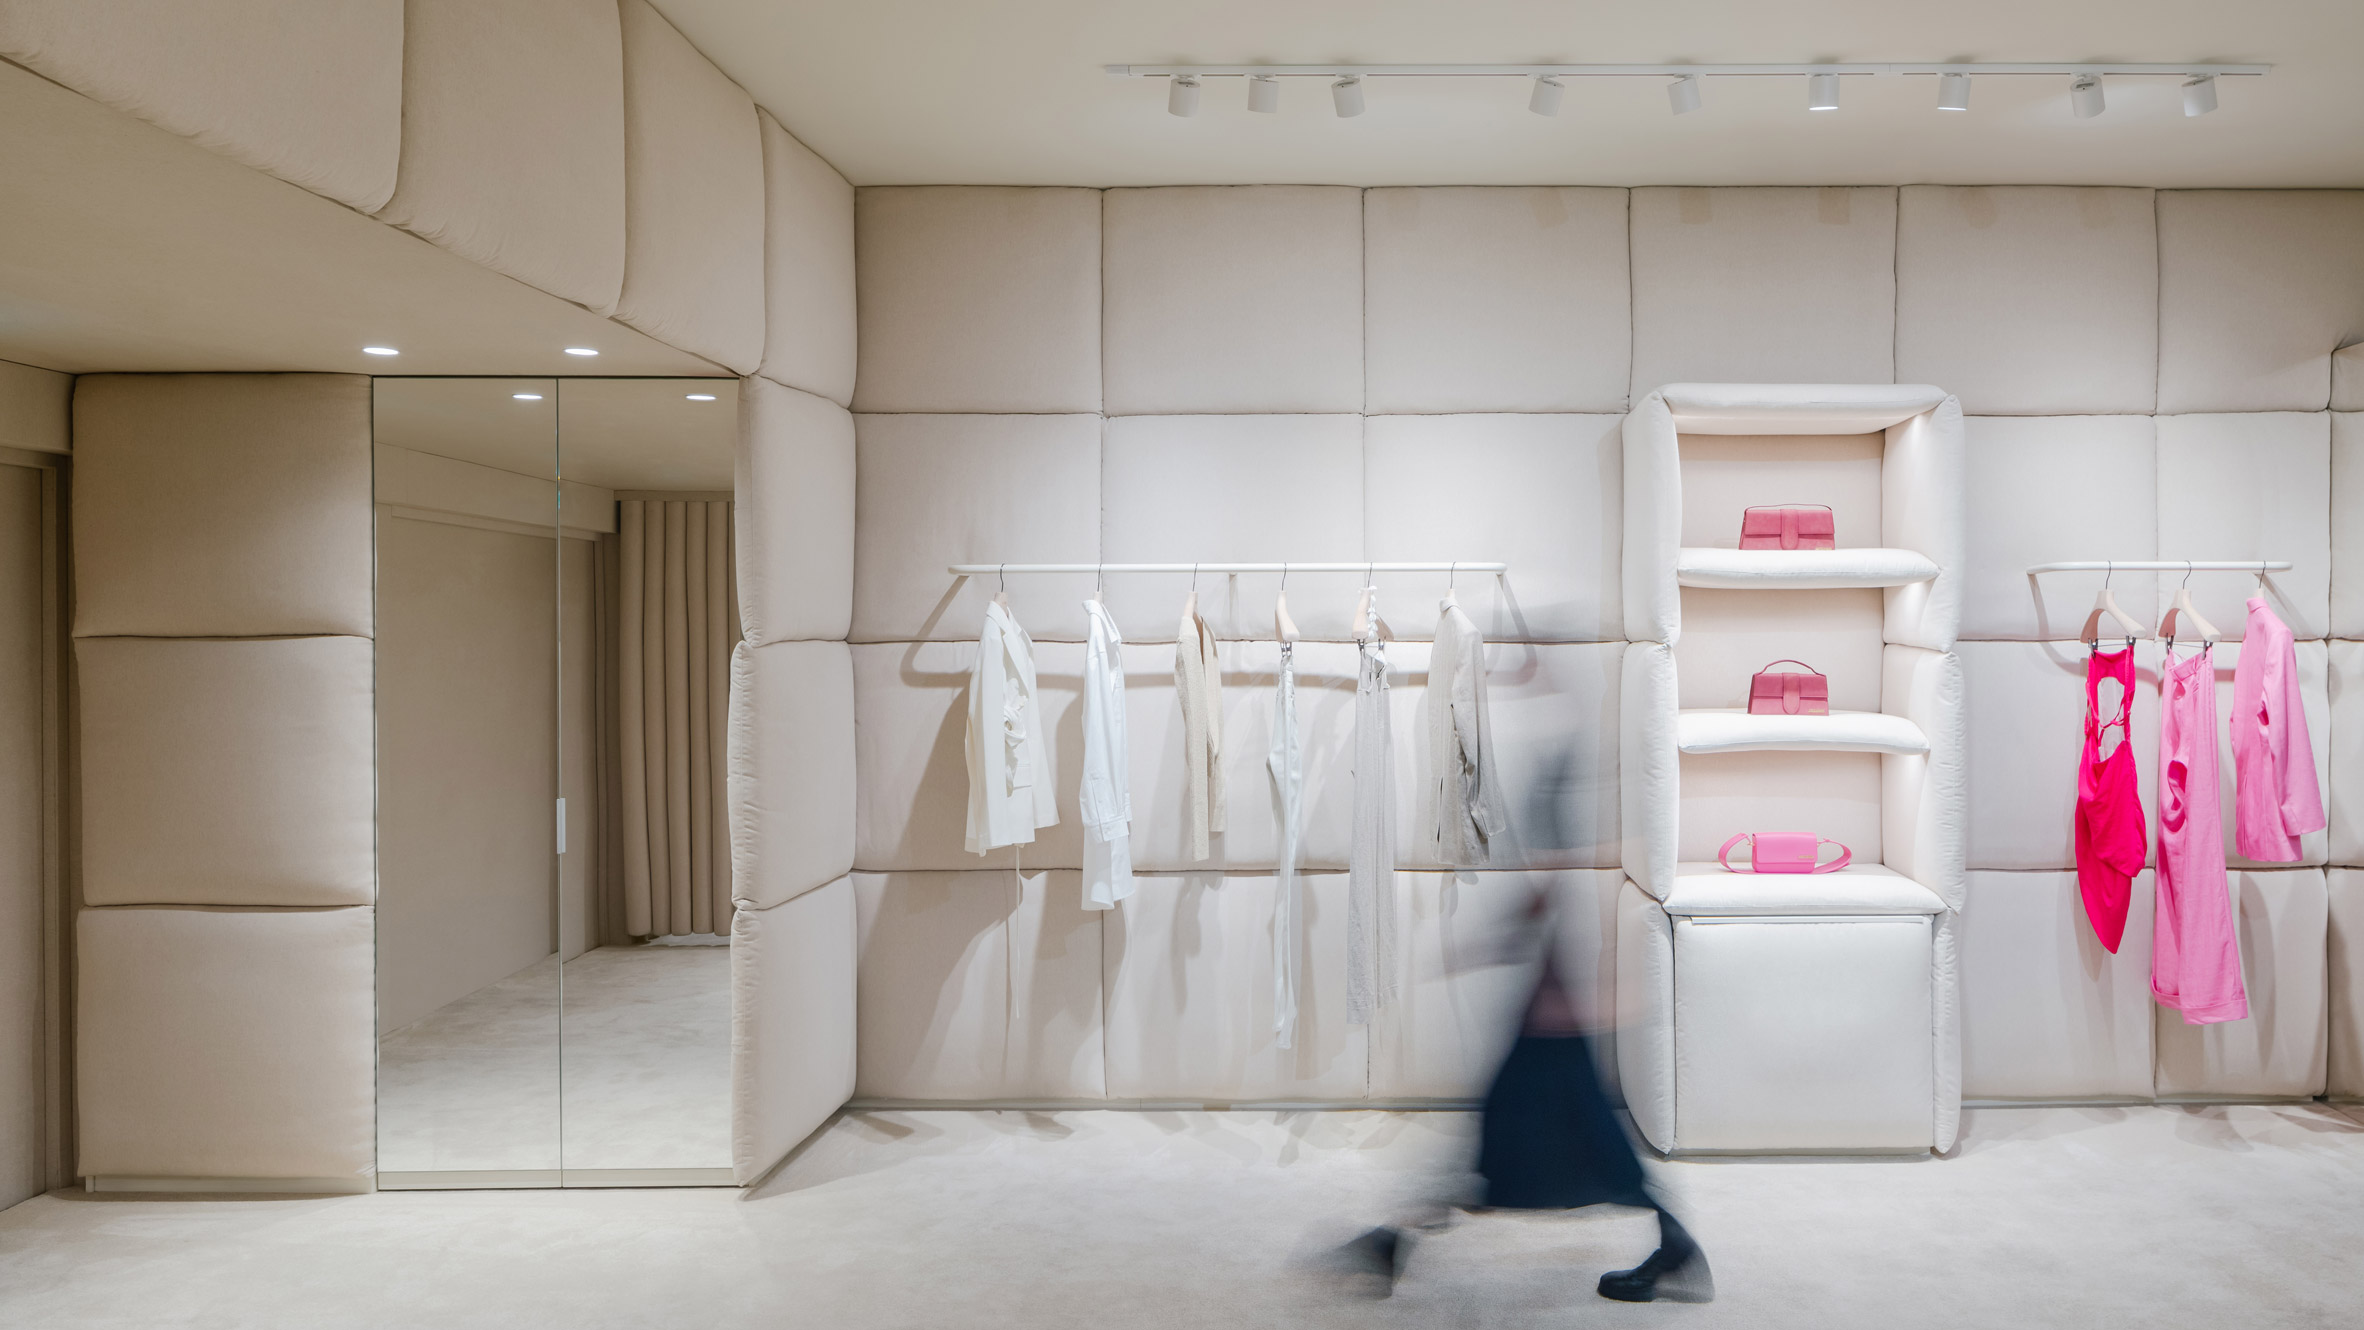 Far away Governor feed AMO cocoons Jacquemus store in pillows to create "bedroom-like" interior